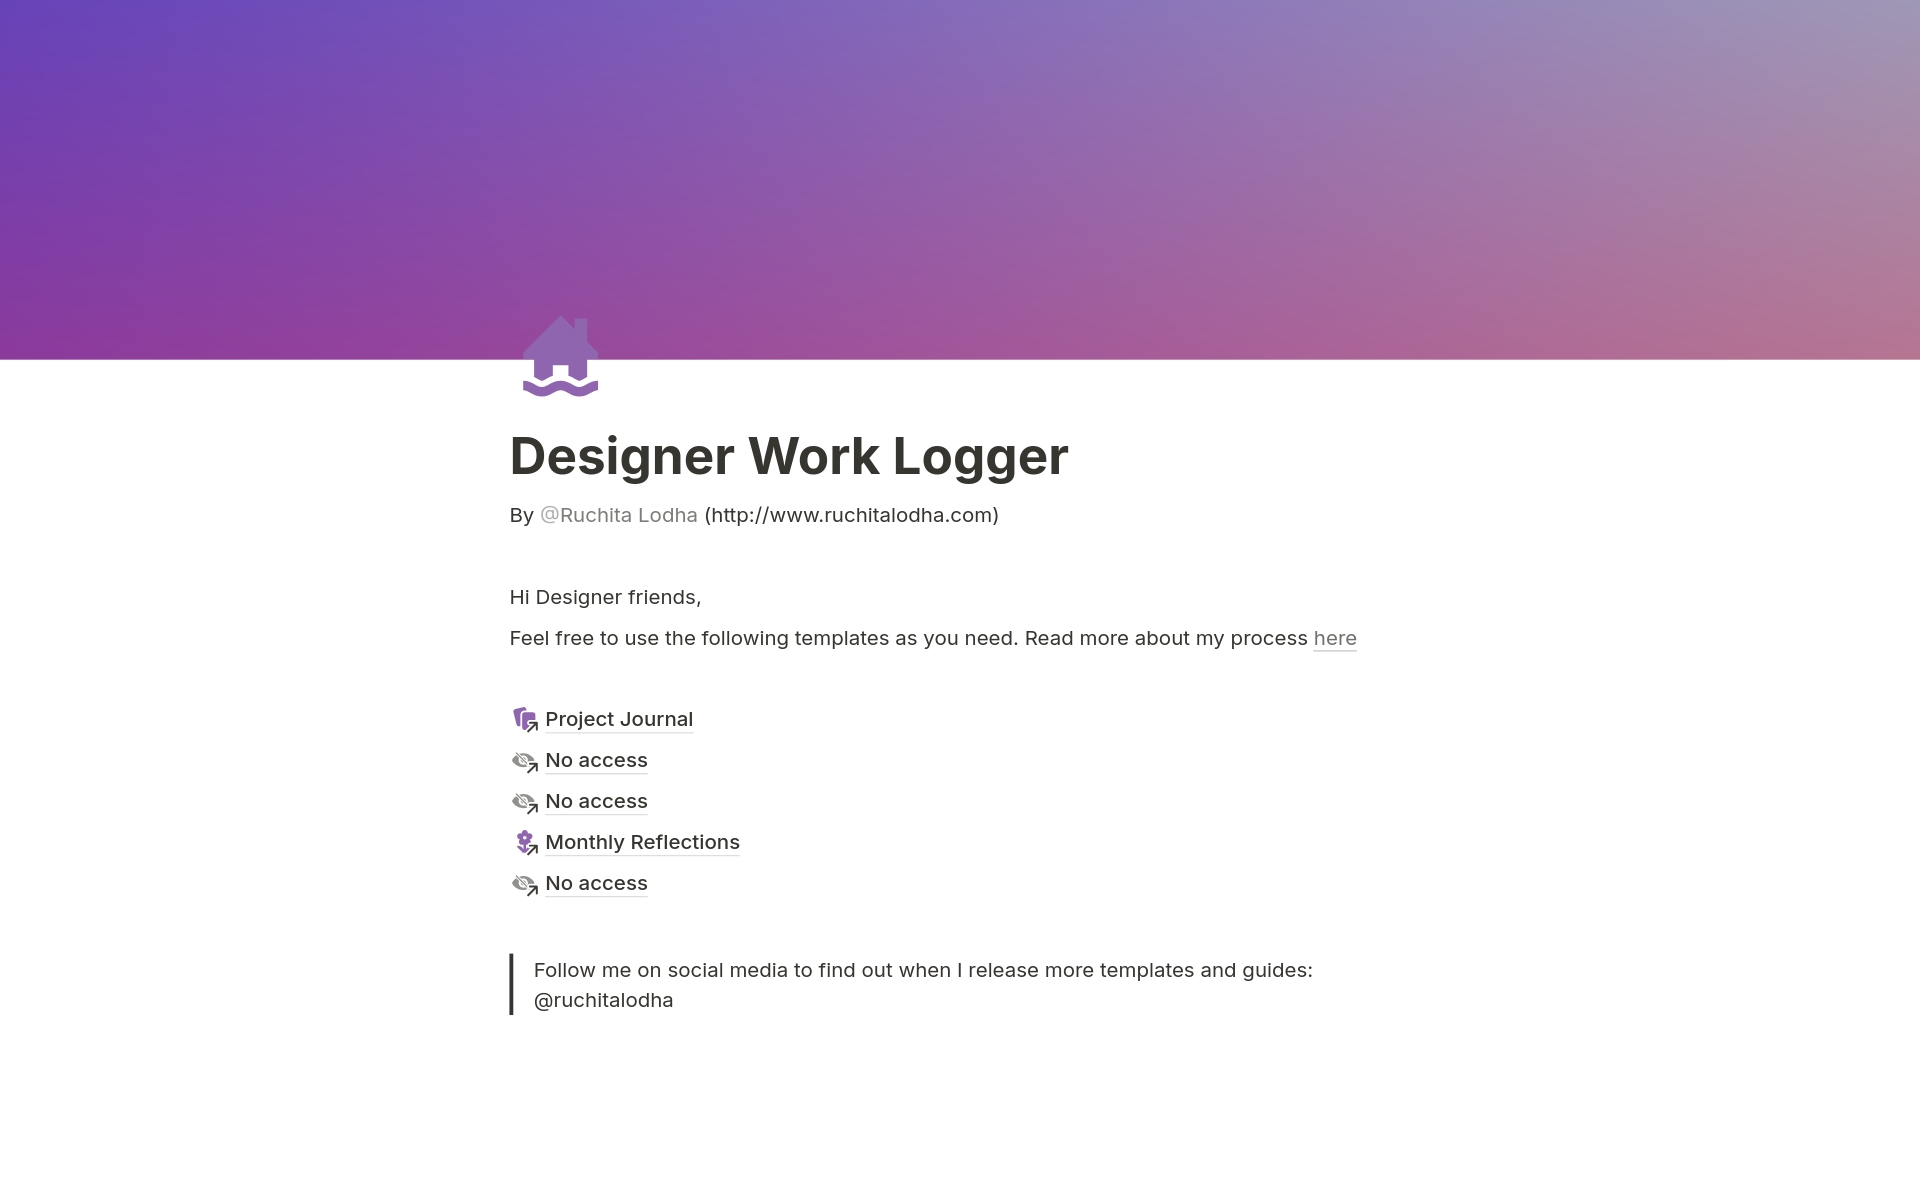 A template preview for Designer’s Notebook